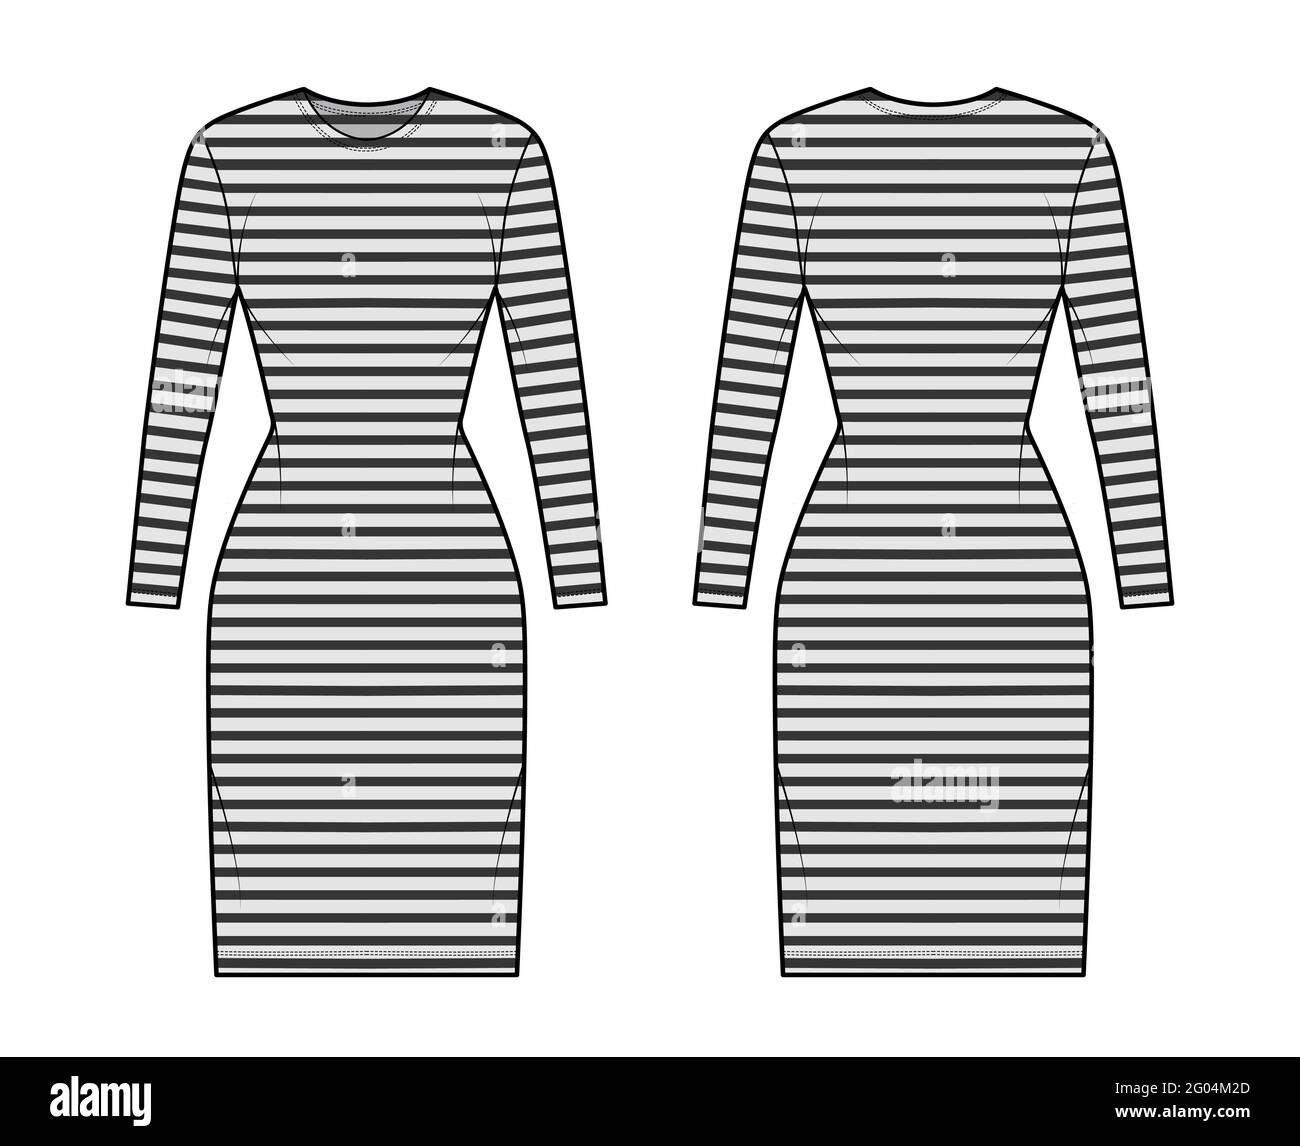 Dress sailor technical fashion illustration with stripes, long sleeves ...